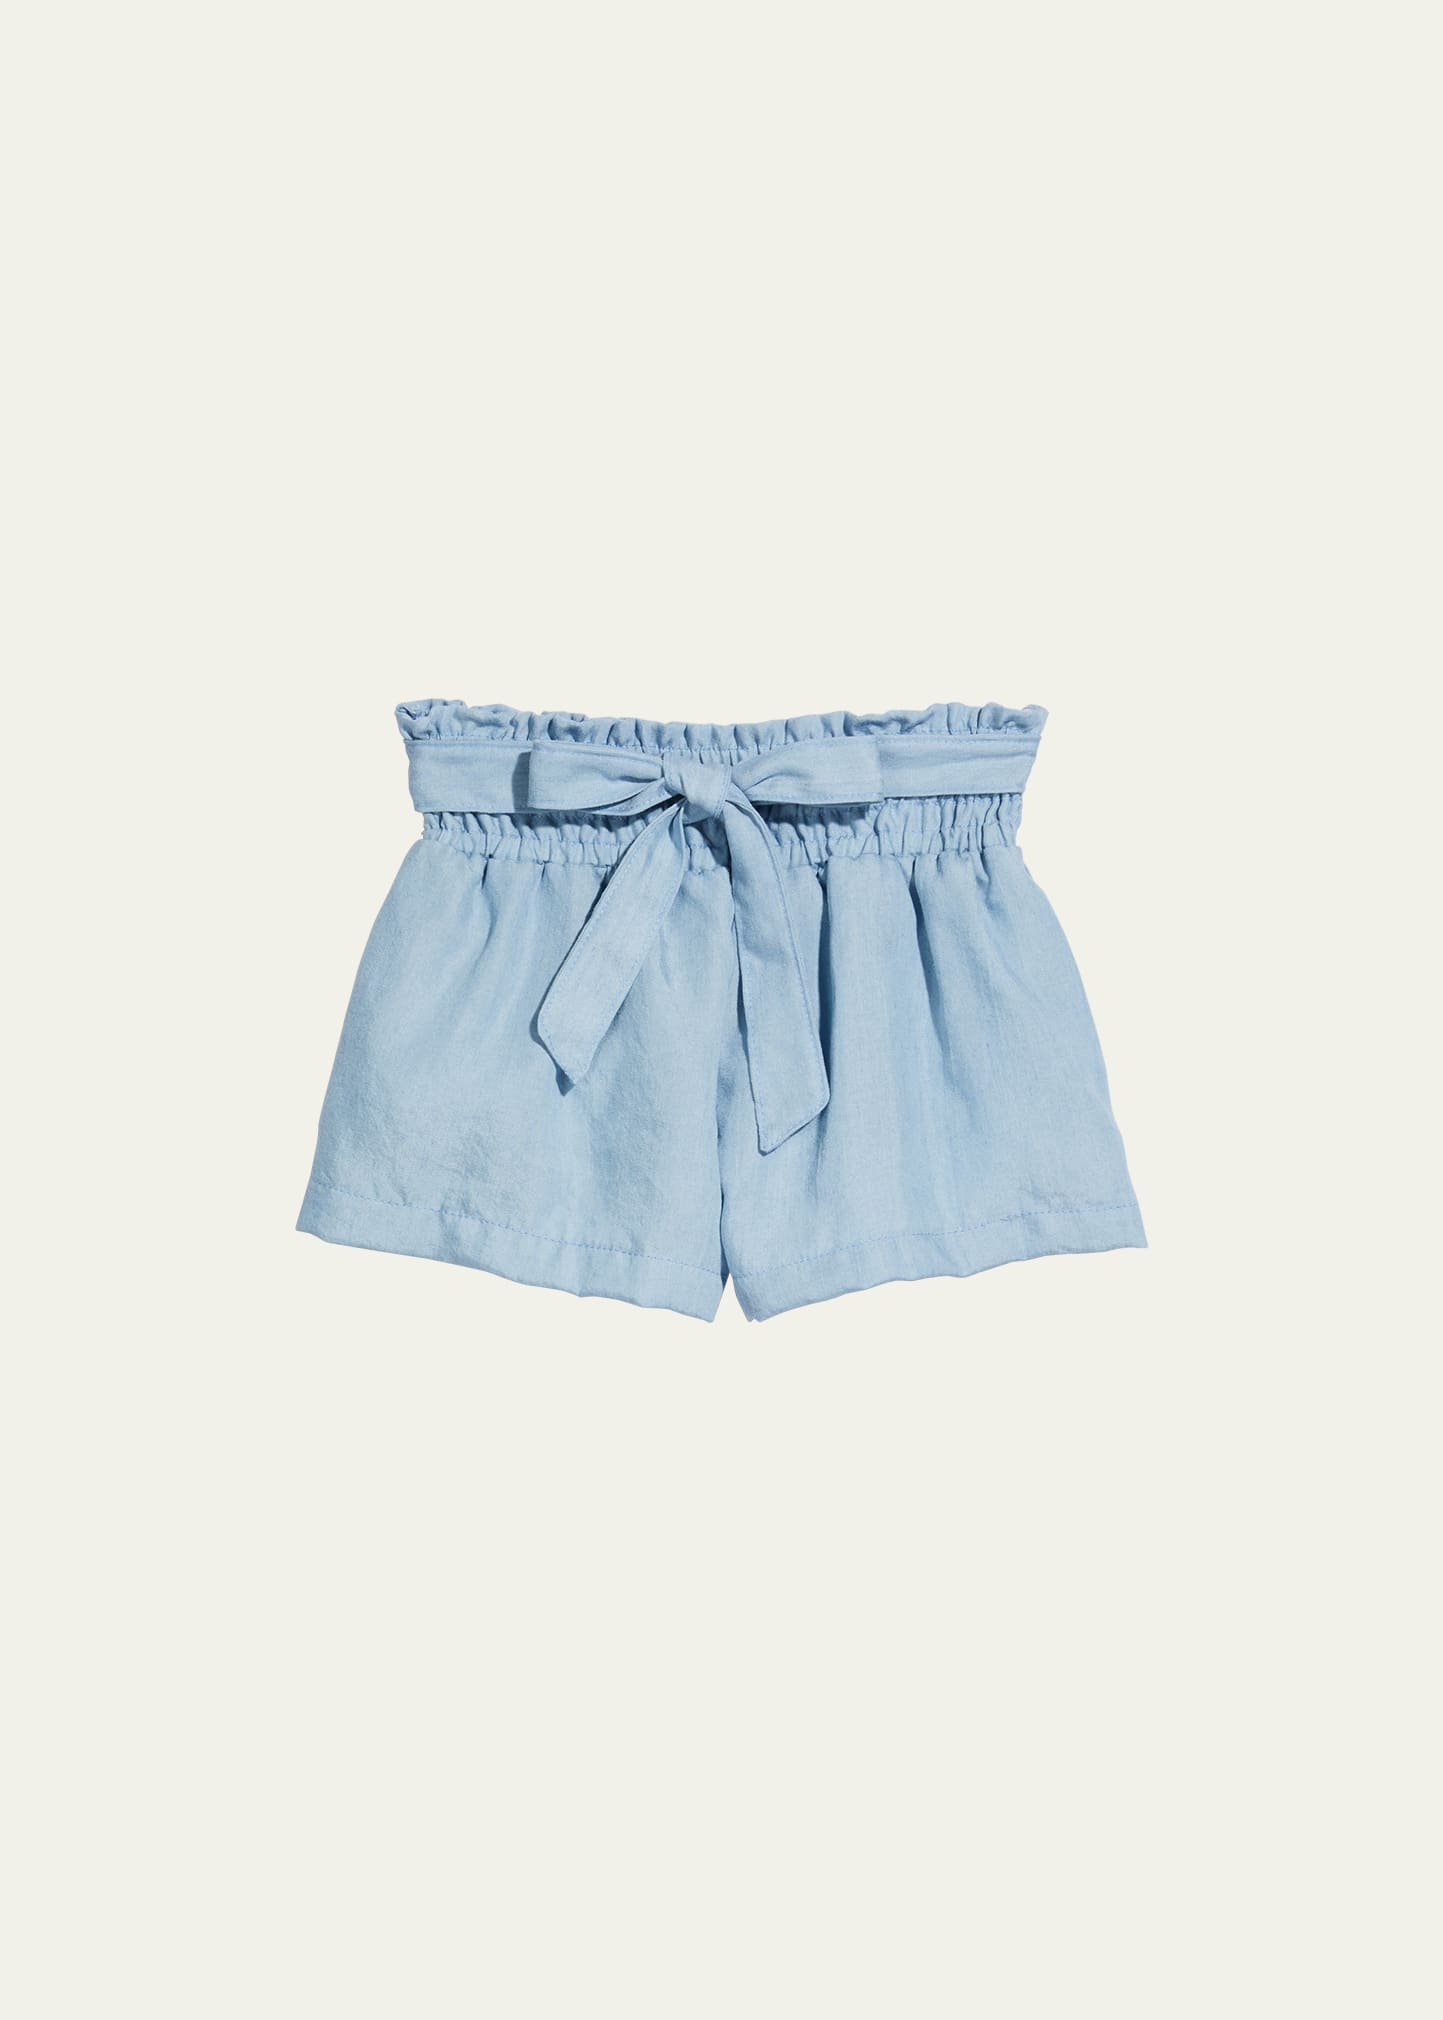 Flowers By Zoe Kids' Girl's Chambray Shorts In Blue